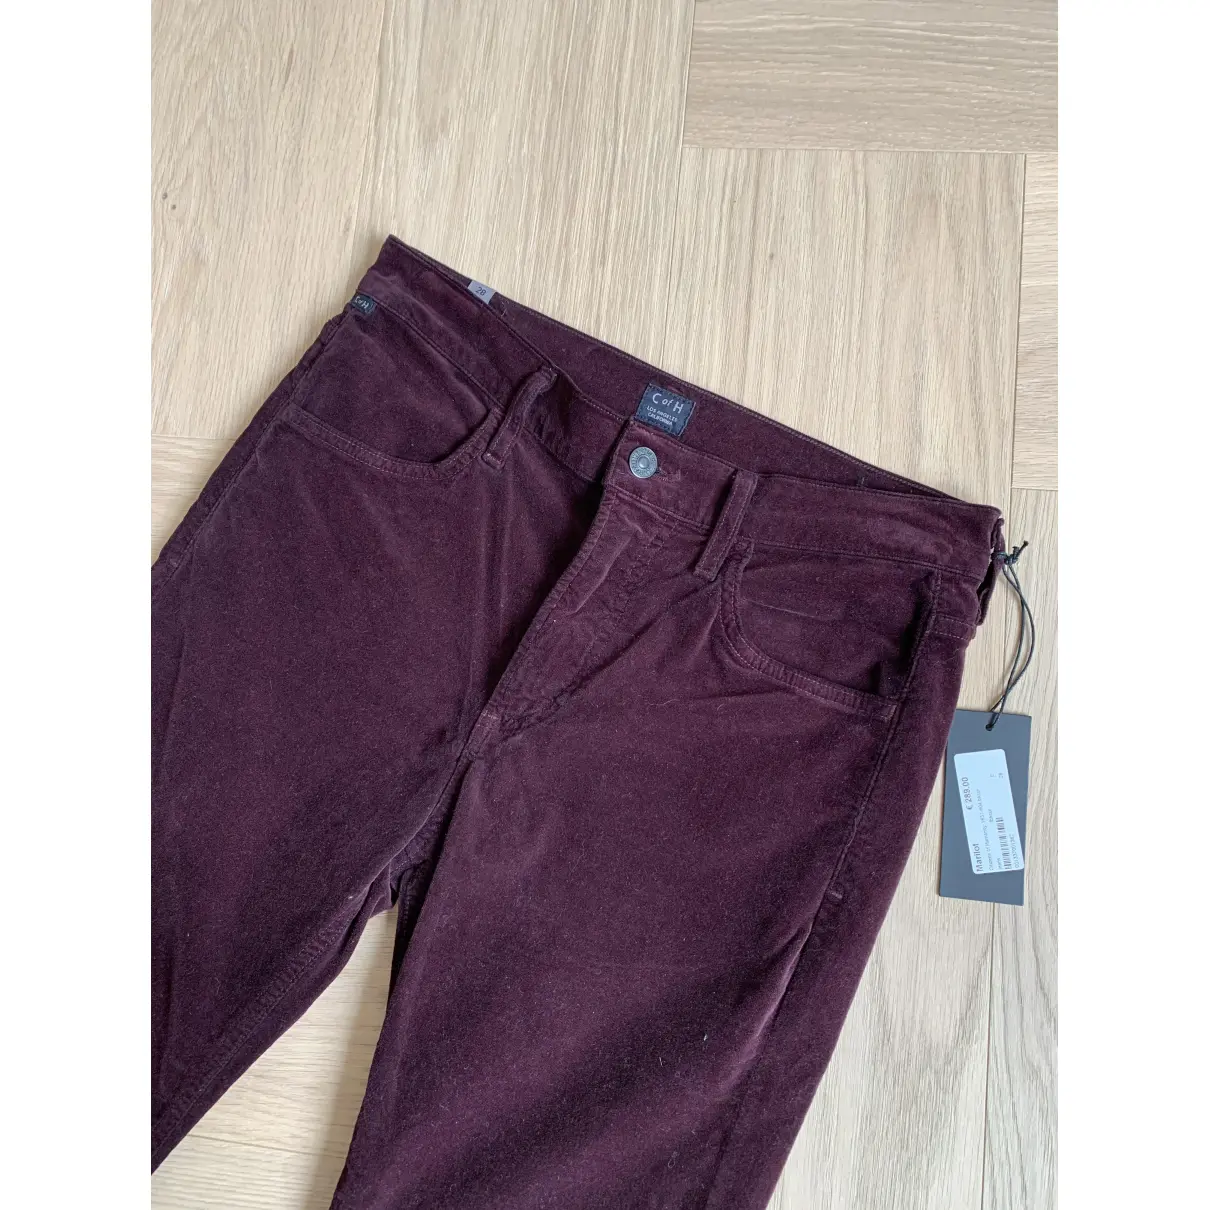 Burgundy Cotton Jeans Citizens Of Humanity